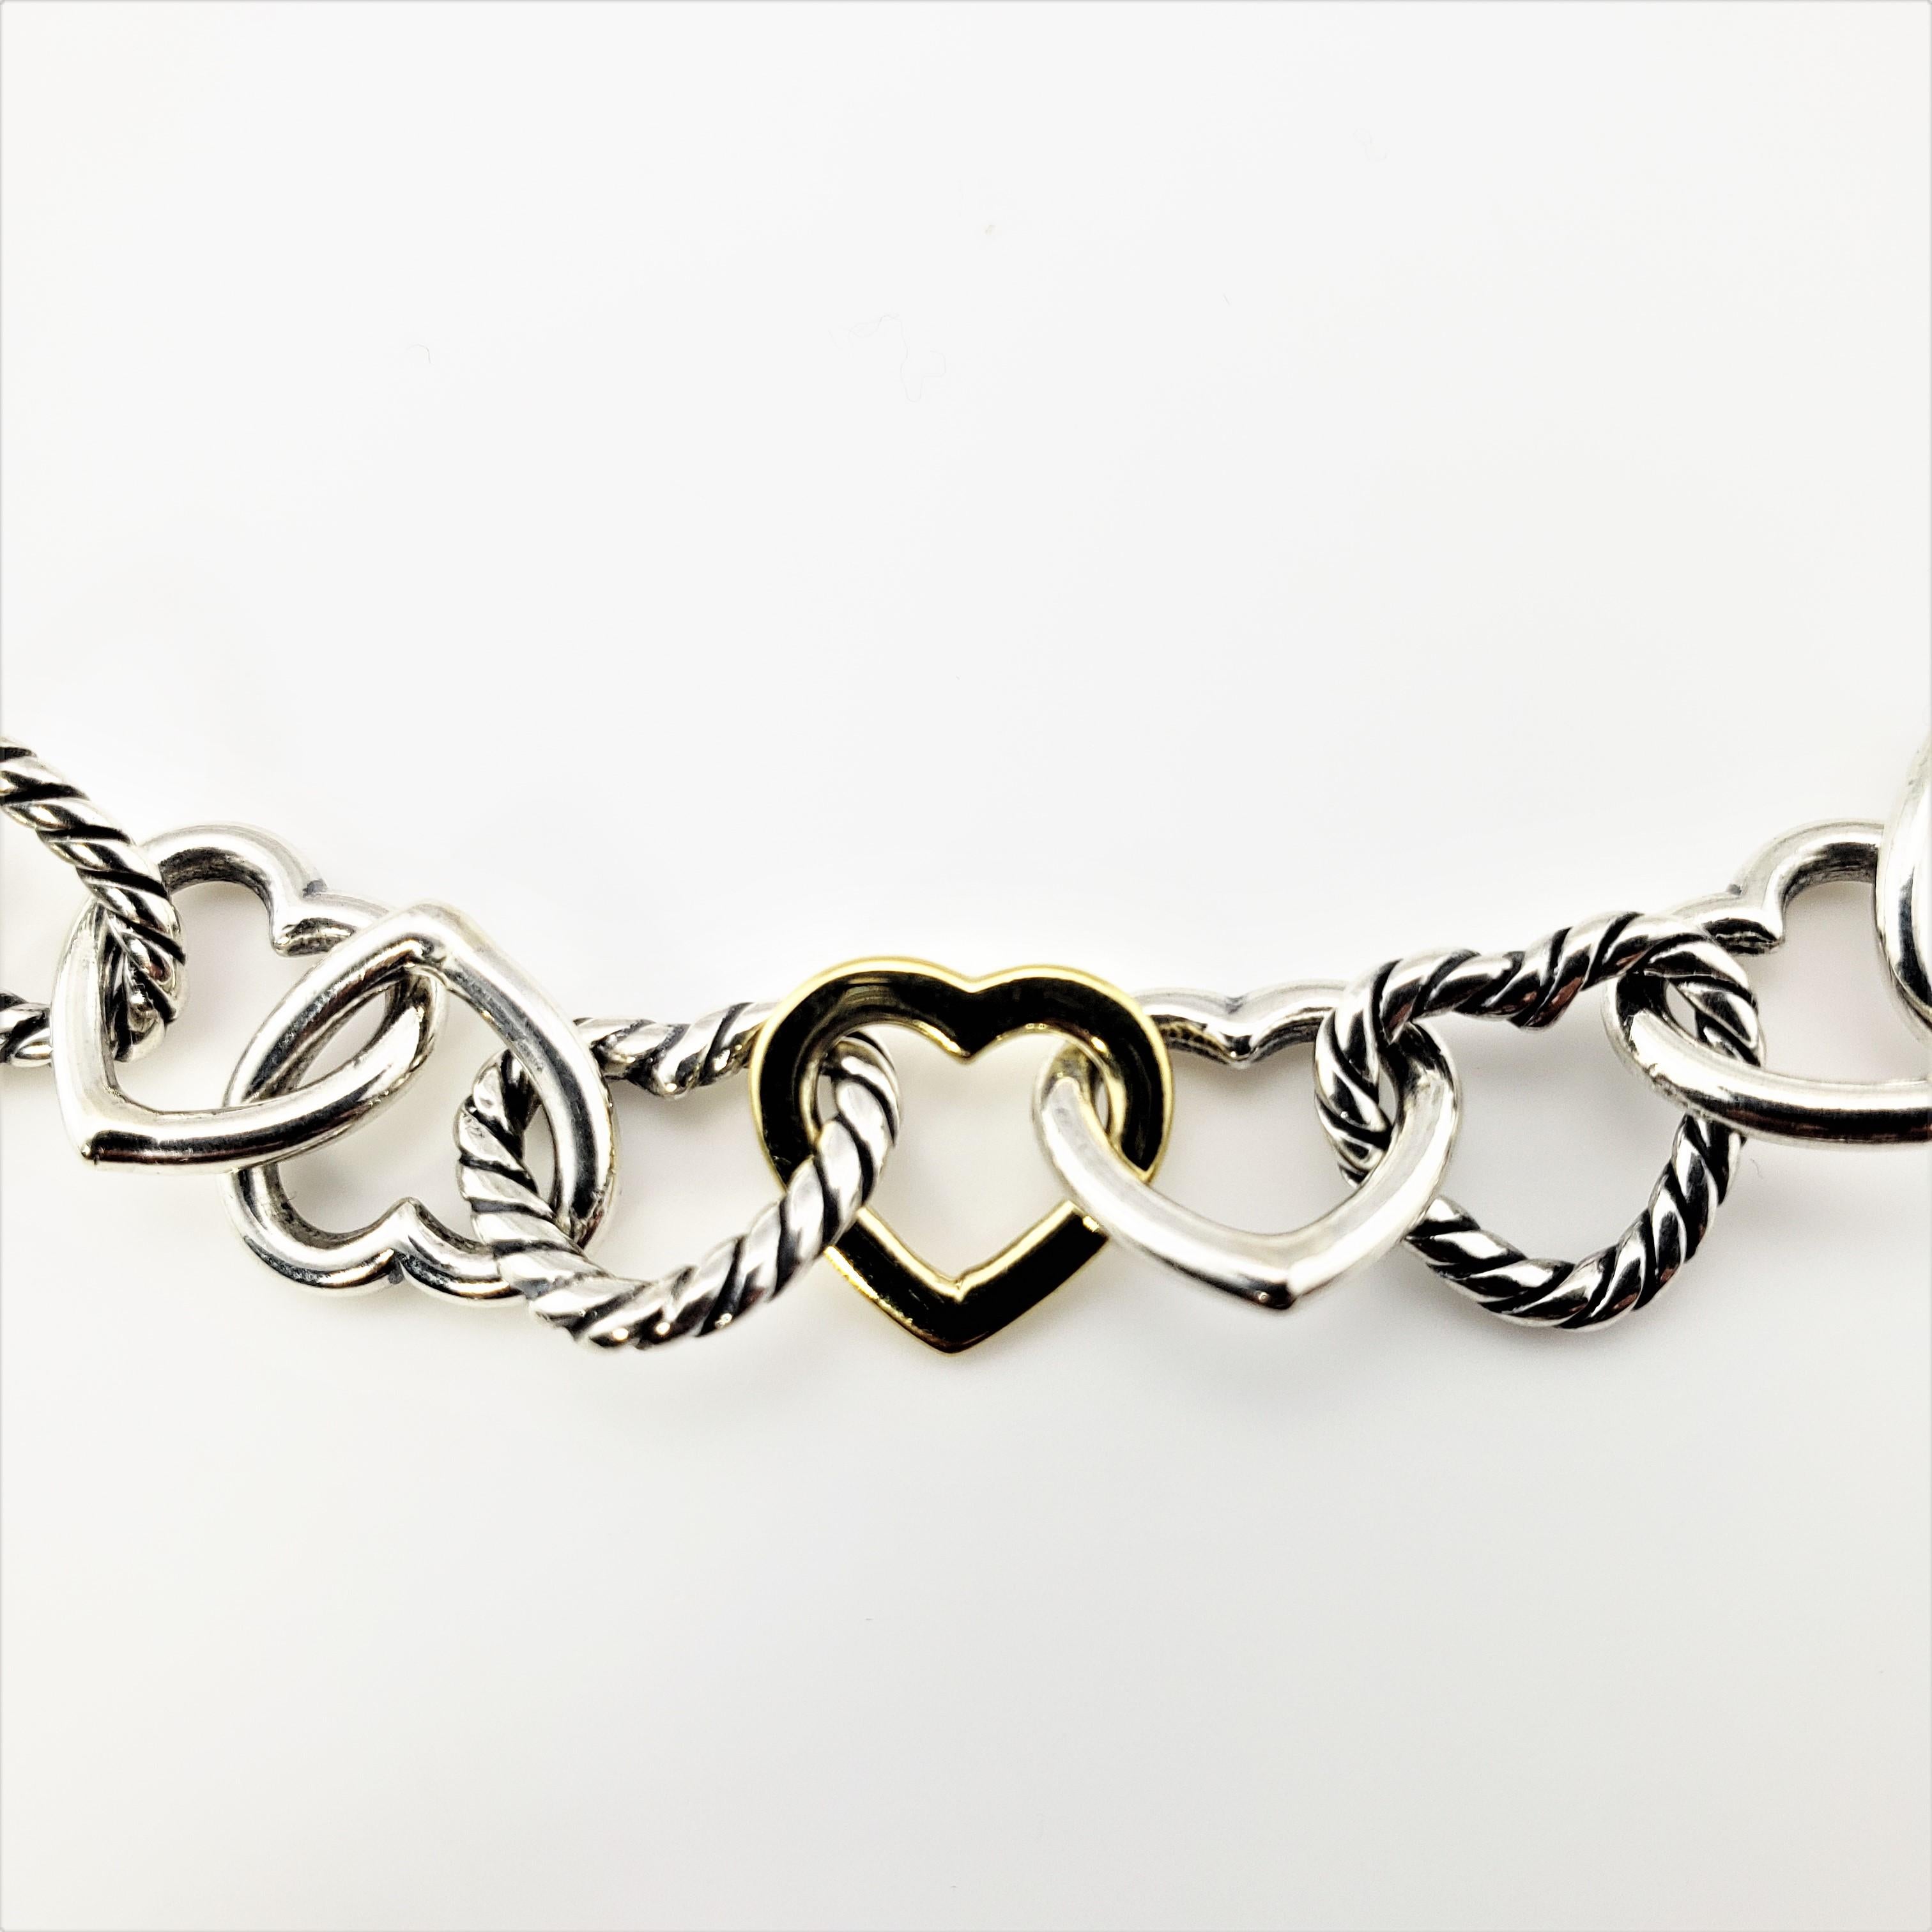 David Yurman Sterling Silver and 18 Karat Yellow Gold Heart Link Necklace-

This stunning heart link necklace is beautifully crafted in sterling silver and 18K yellow gold by David Yurman.  Toggle closure.

Width:  10.2 mm

Size:  15.75